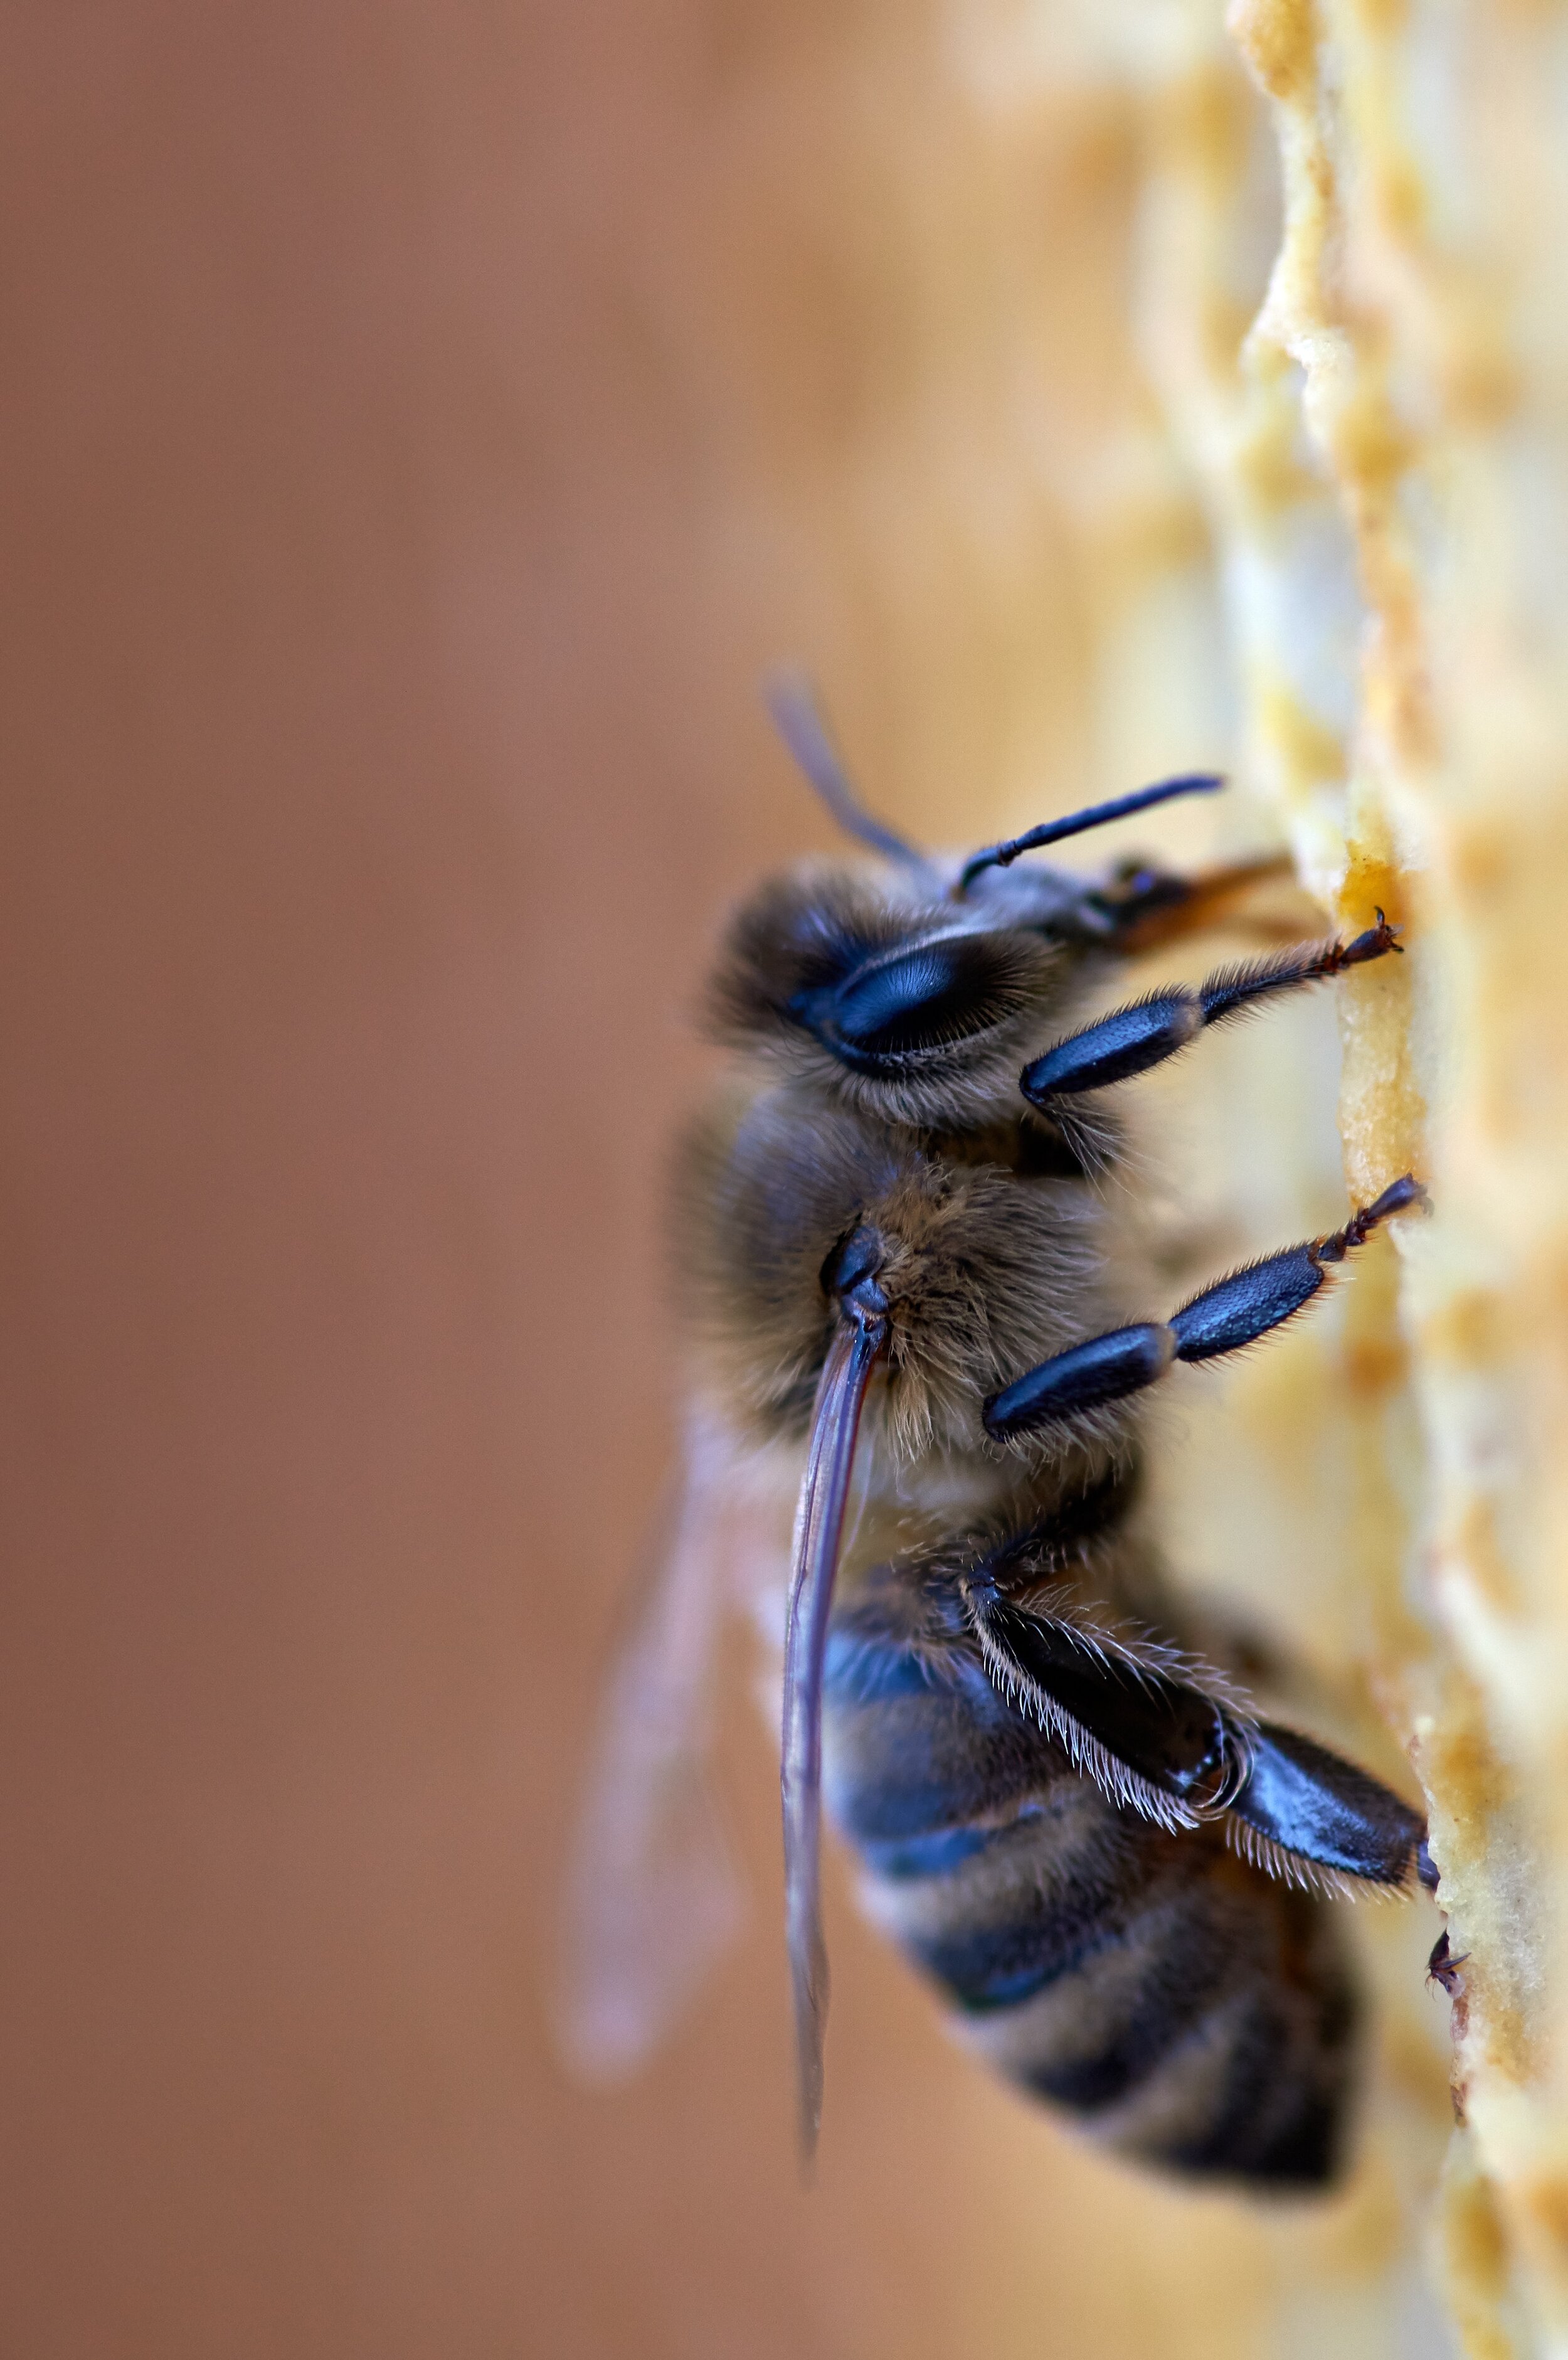  Honey bees have hairs growing out of their eyeballs that seem to help them sense the direction of air currents while flying. 